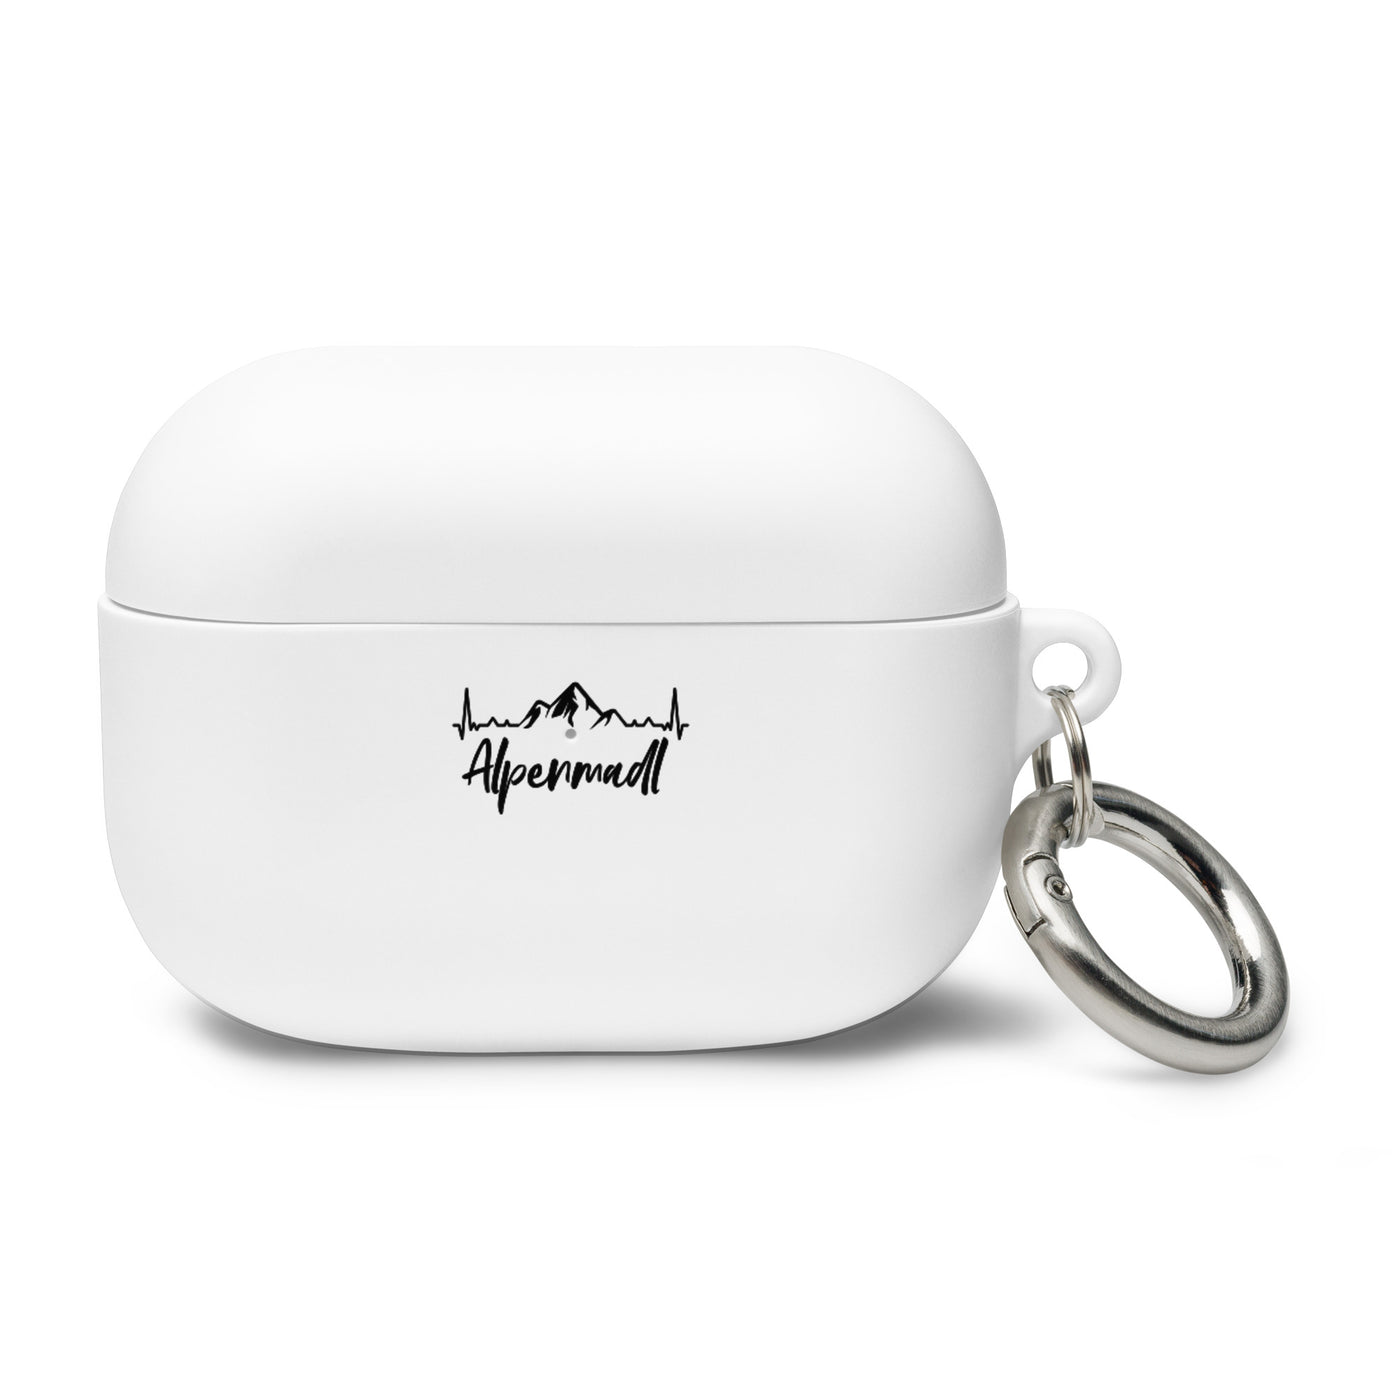 Alpenmadl 1 - AirPods Case berge Weiß AirPods Pro